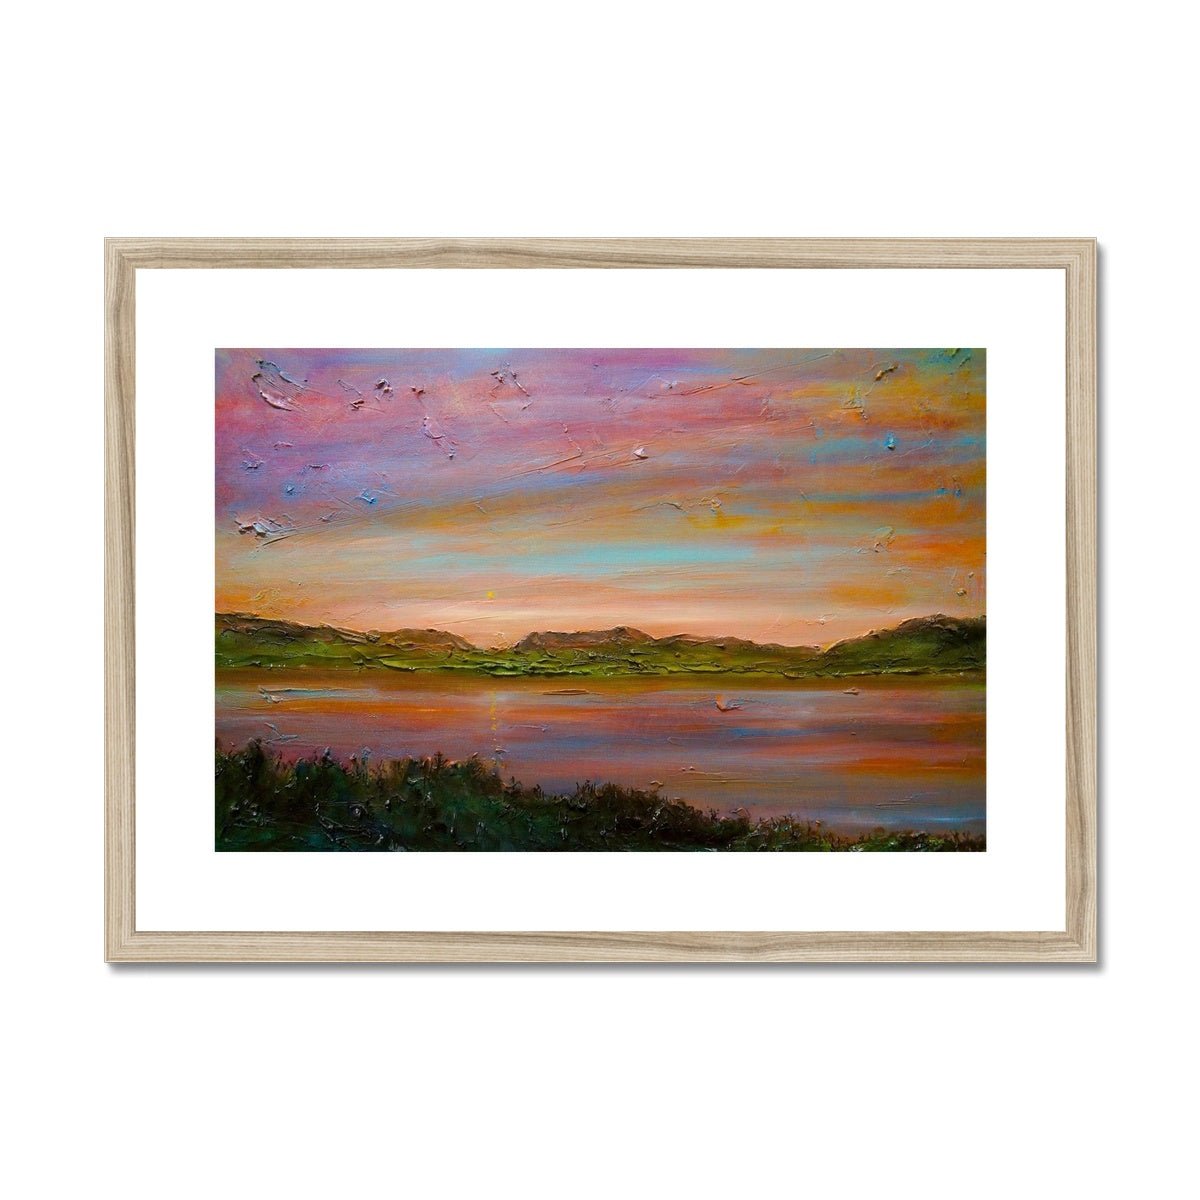 Gourock Golf Club Sunset Painting | Framed & Mounted Prints From Scotland-Framed & Mounted Prints-River Clyde Art Gallery-A2 Landscape-Natural Frame-Paintings, Prints, Homeware, Art Gifts From Scotland By Scottish Artist Kevin Hunter